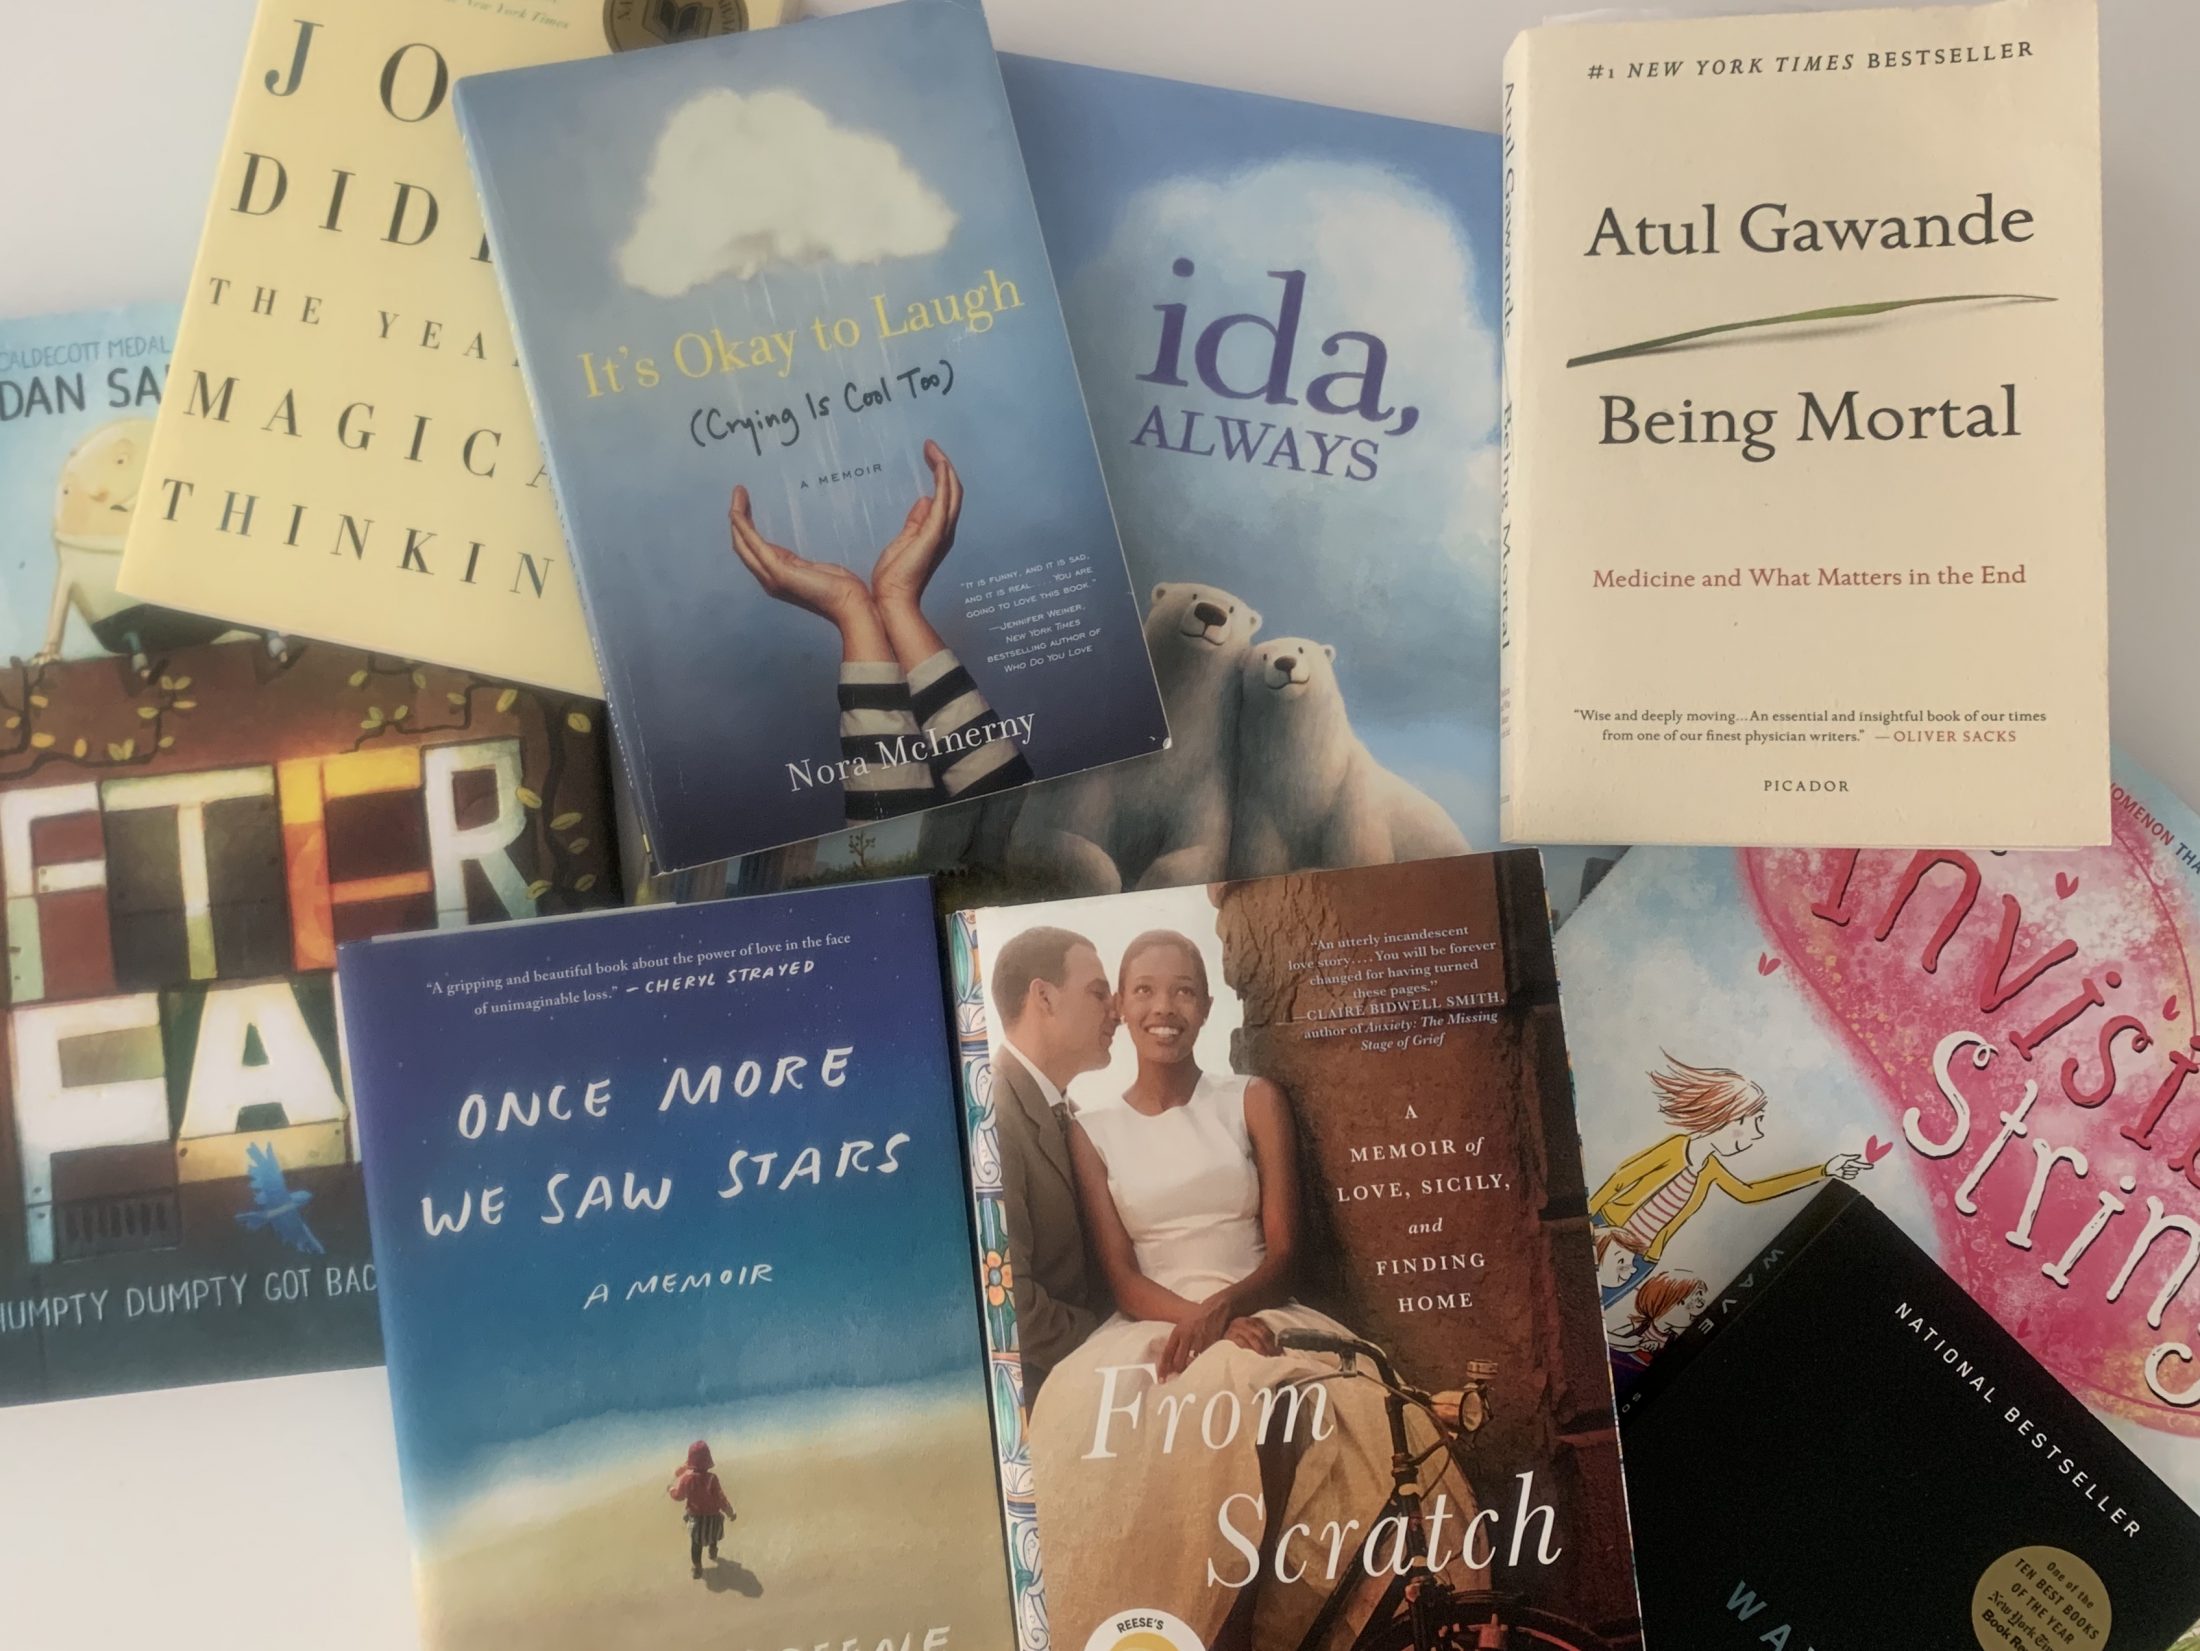 Image of grief books owned by DC widow blog writer Marjorie Brimley